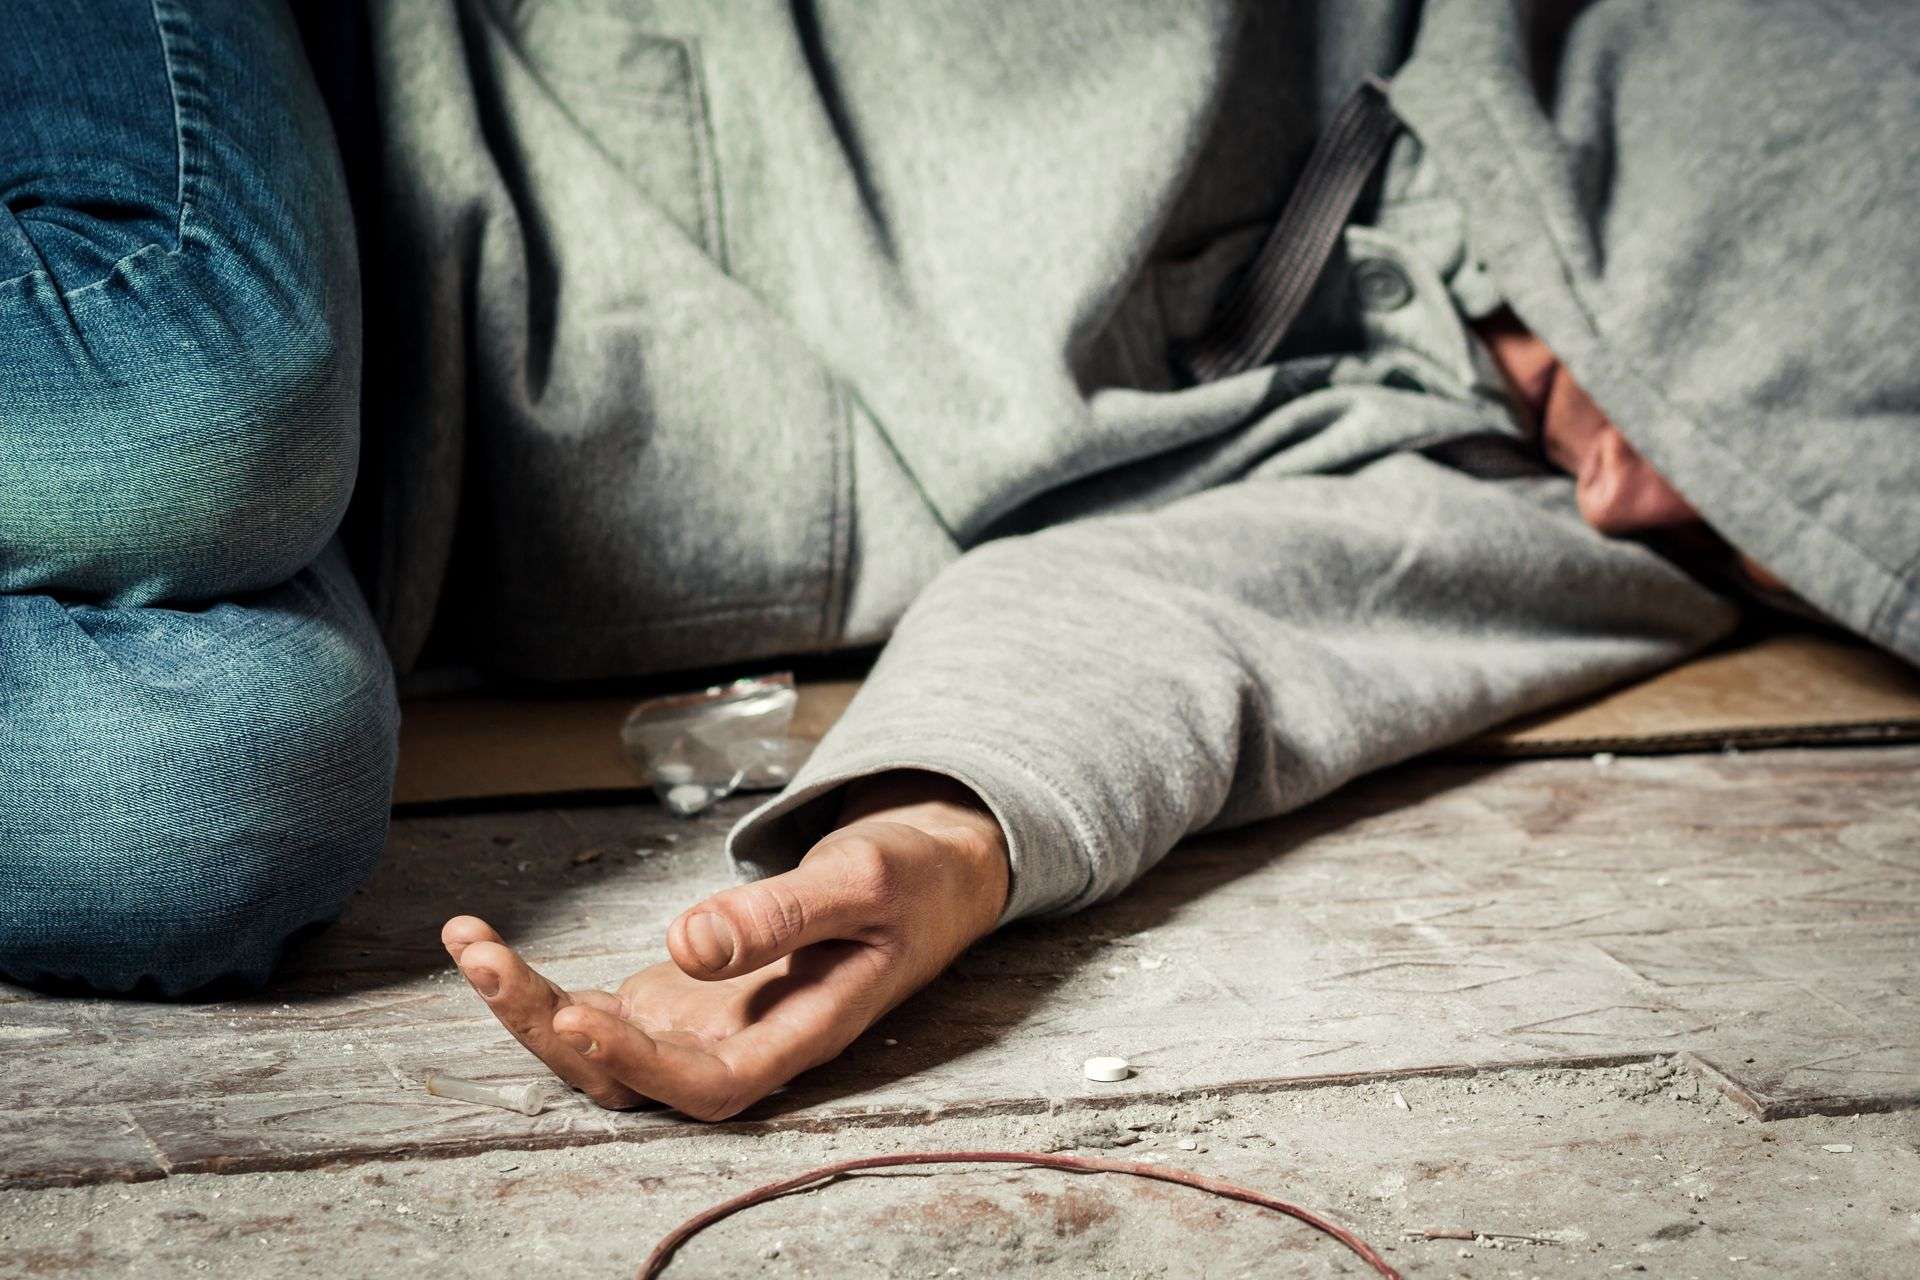 Why Do People Become Addicted To Drugs? Top Reasons Why